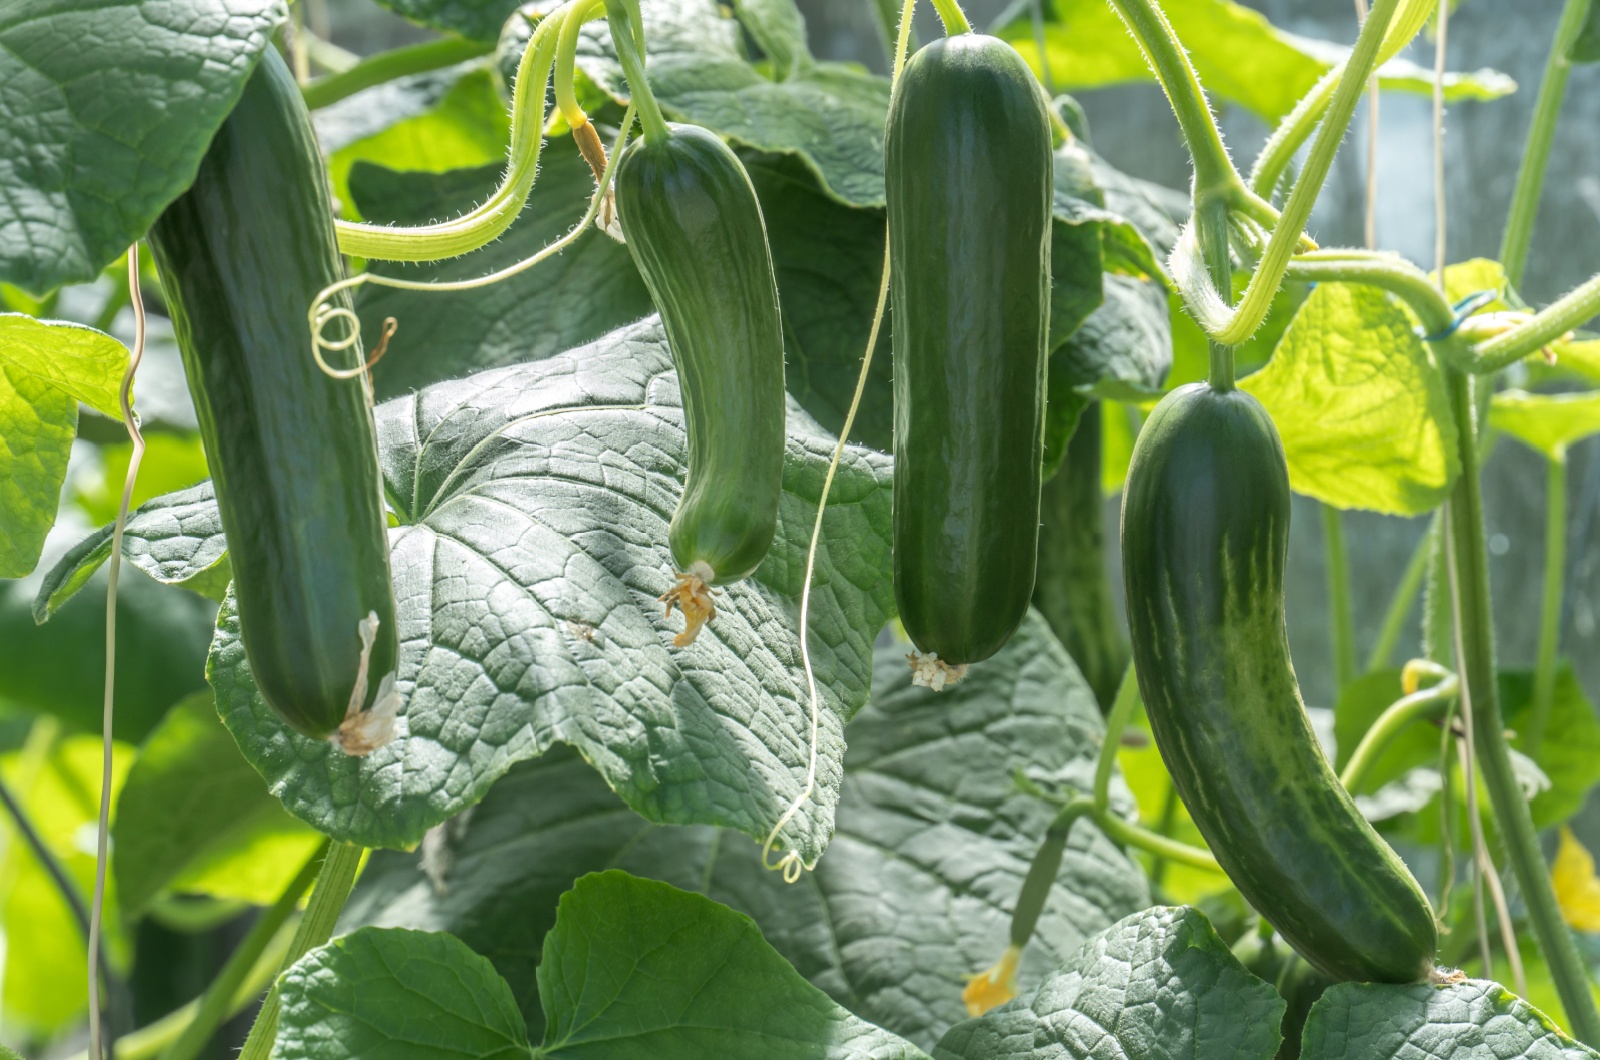 zucchini plant ready for harvest